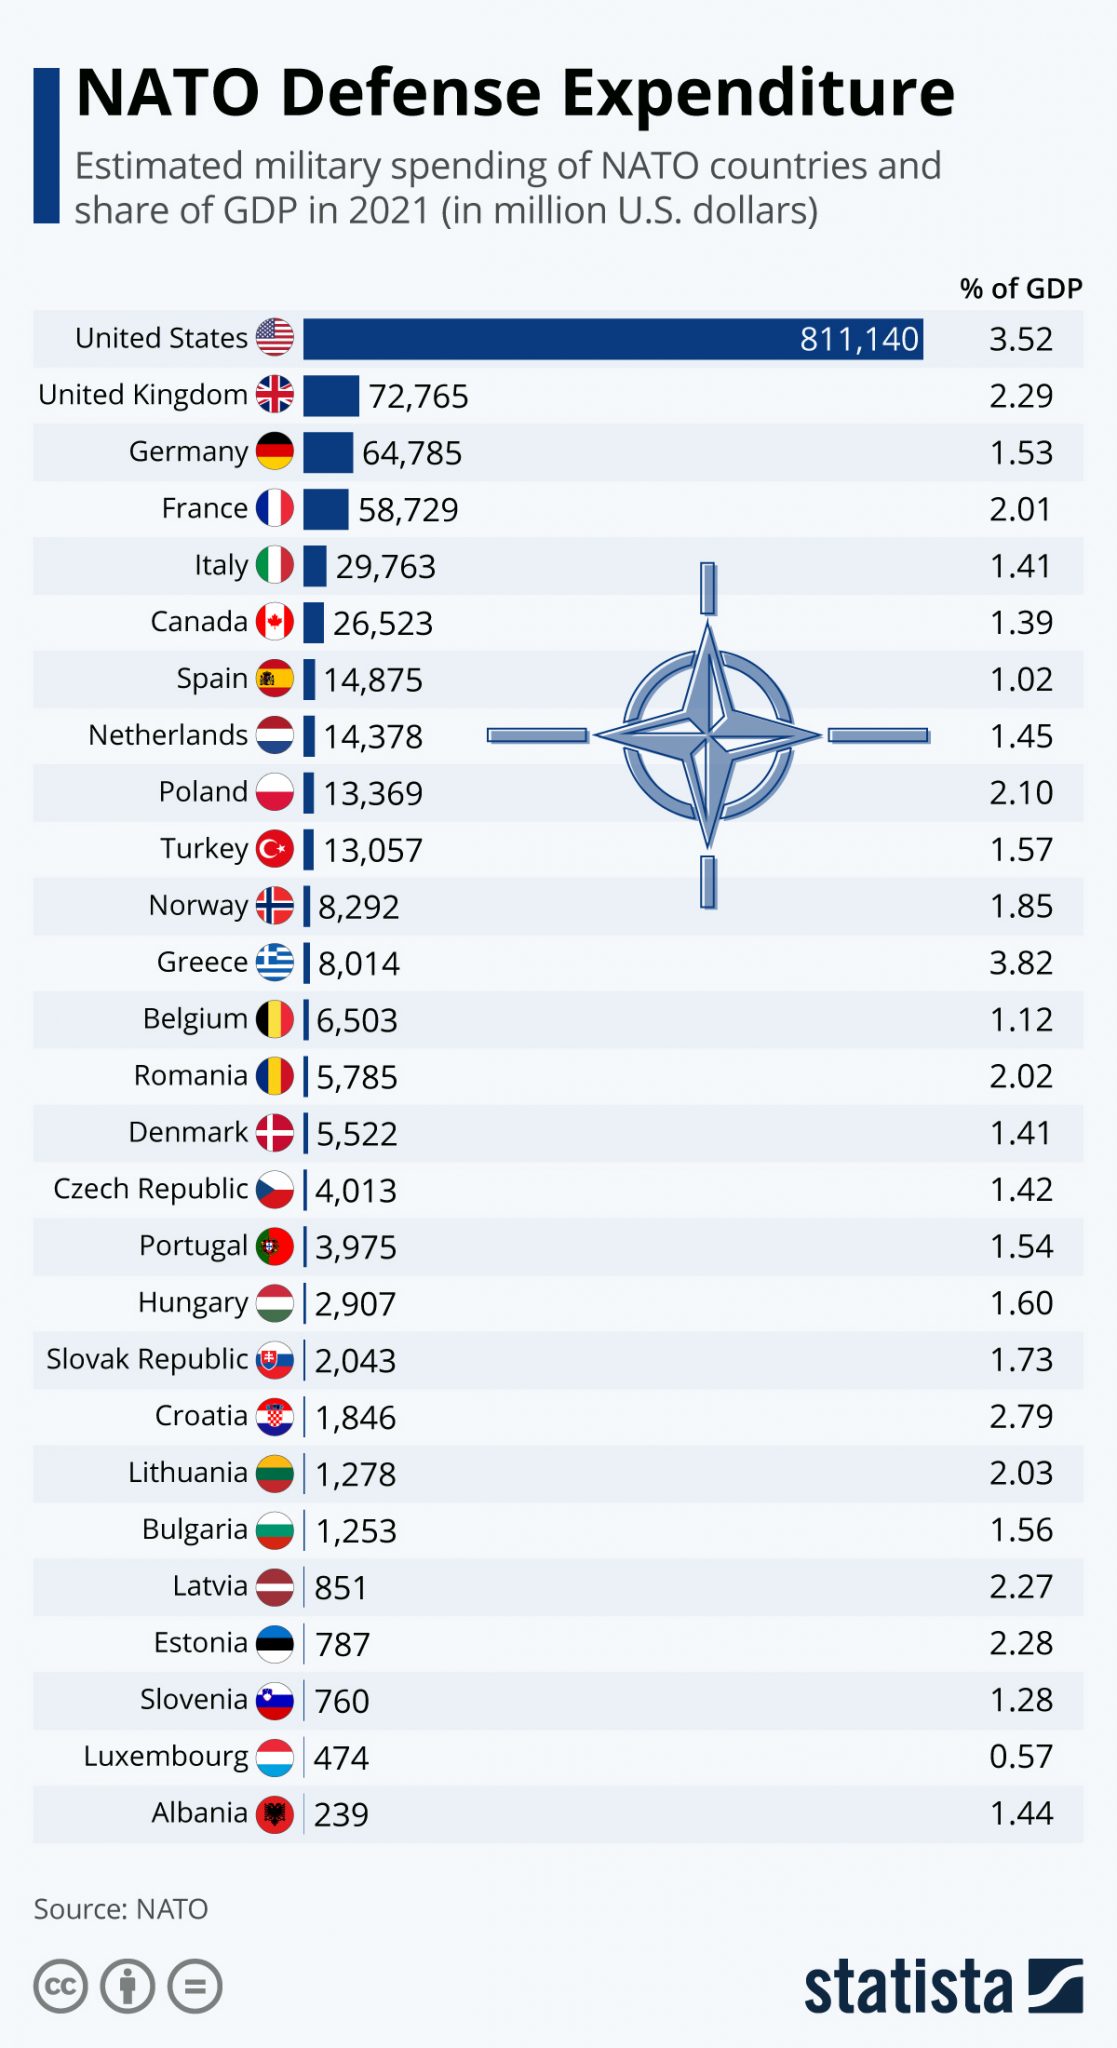 Who Is Meeting Their NATO Defense Spending Commitment and Who Isn't